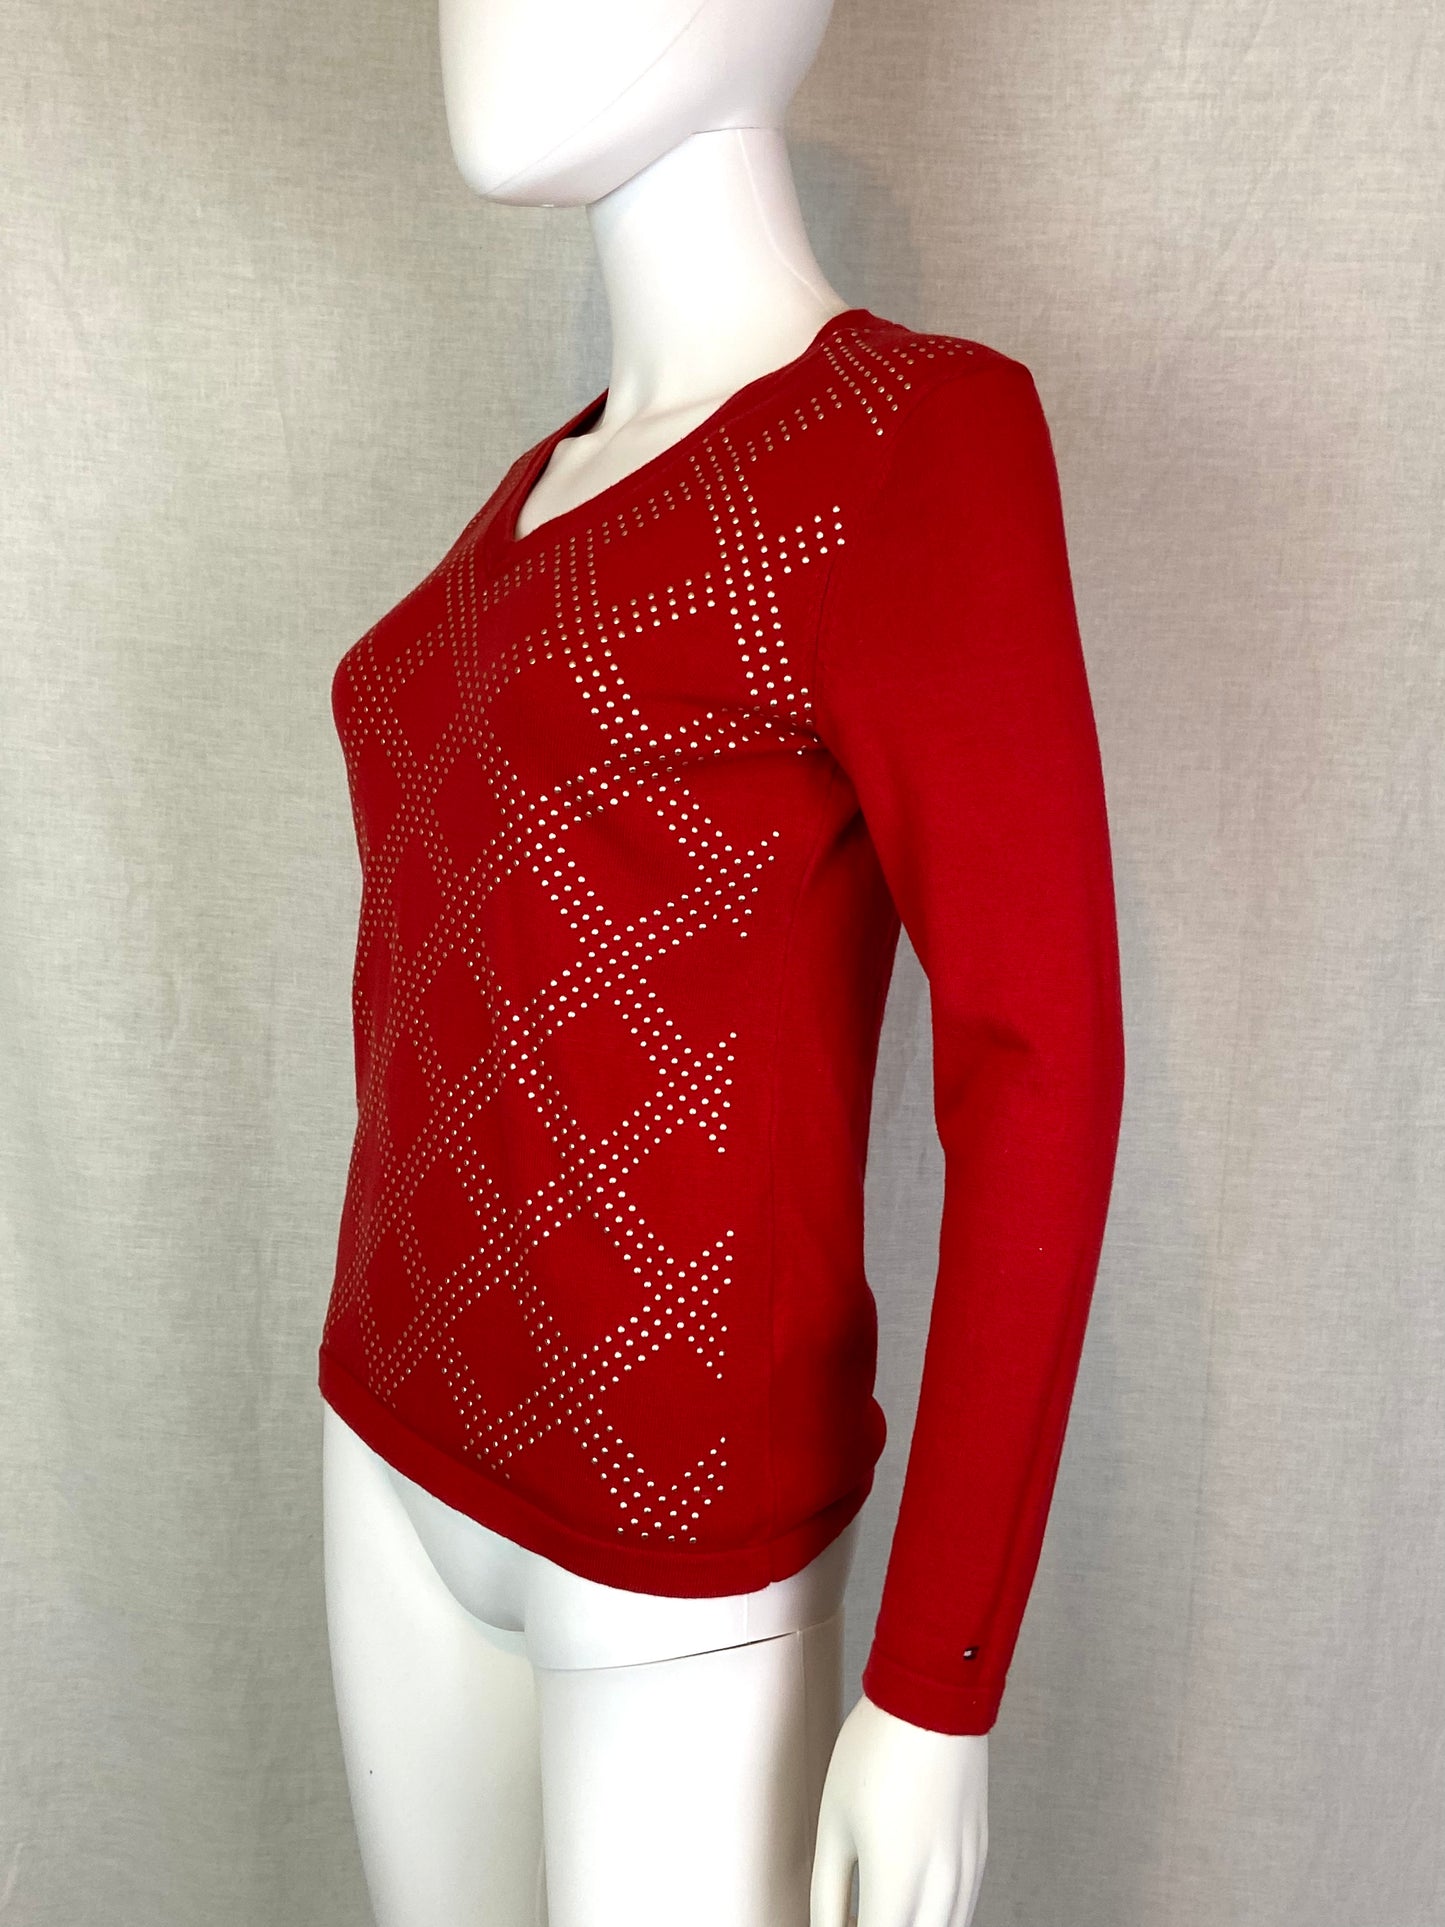 Tommy Hilfiger Studded Red Top Small